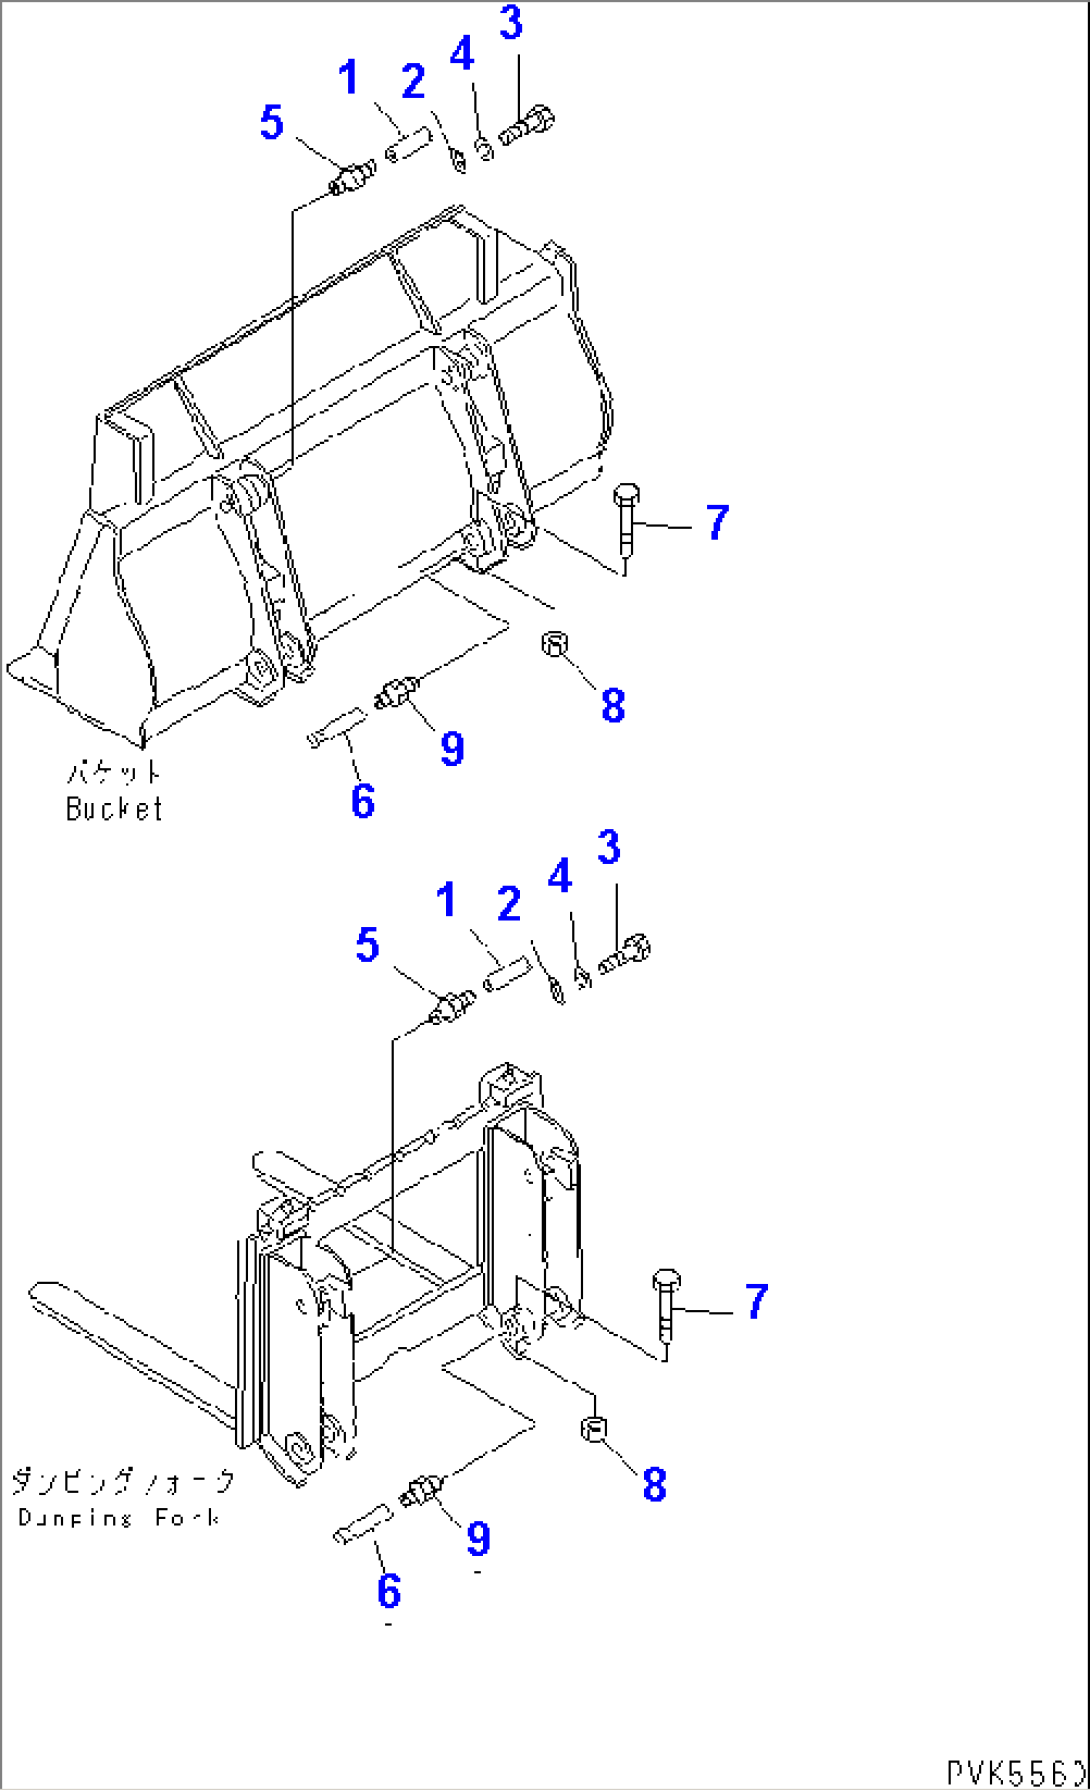 BUCKET AND DUMPING FORK HINGE PIN